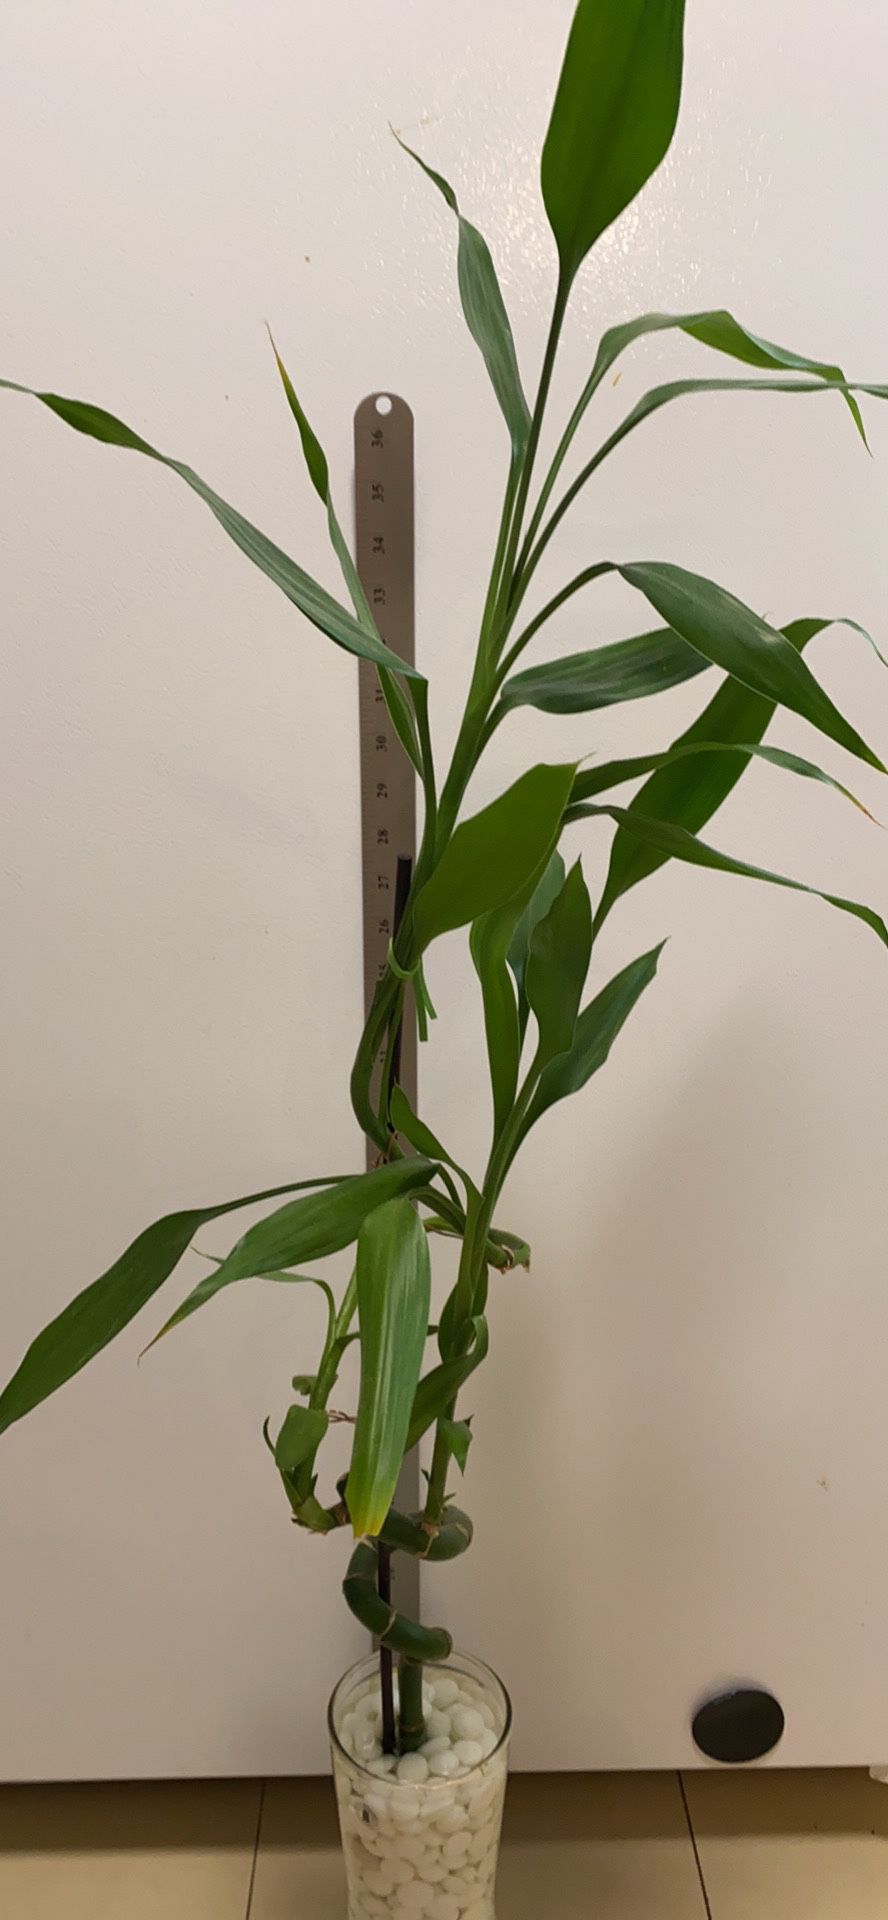 Bamboo Plant Aprox 40” Tall